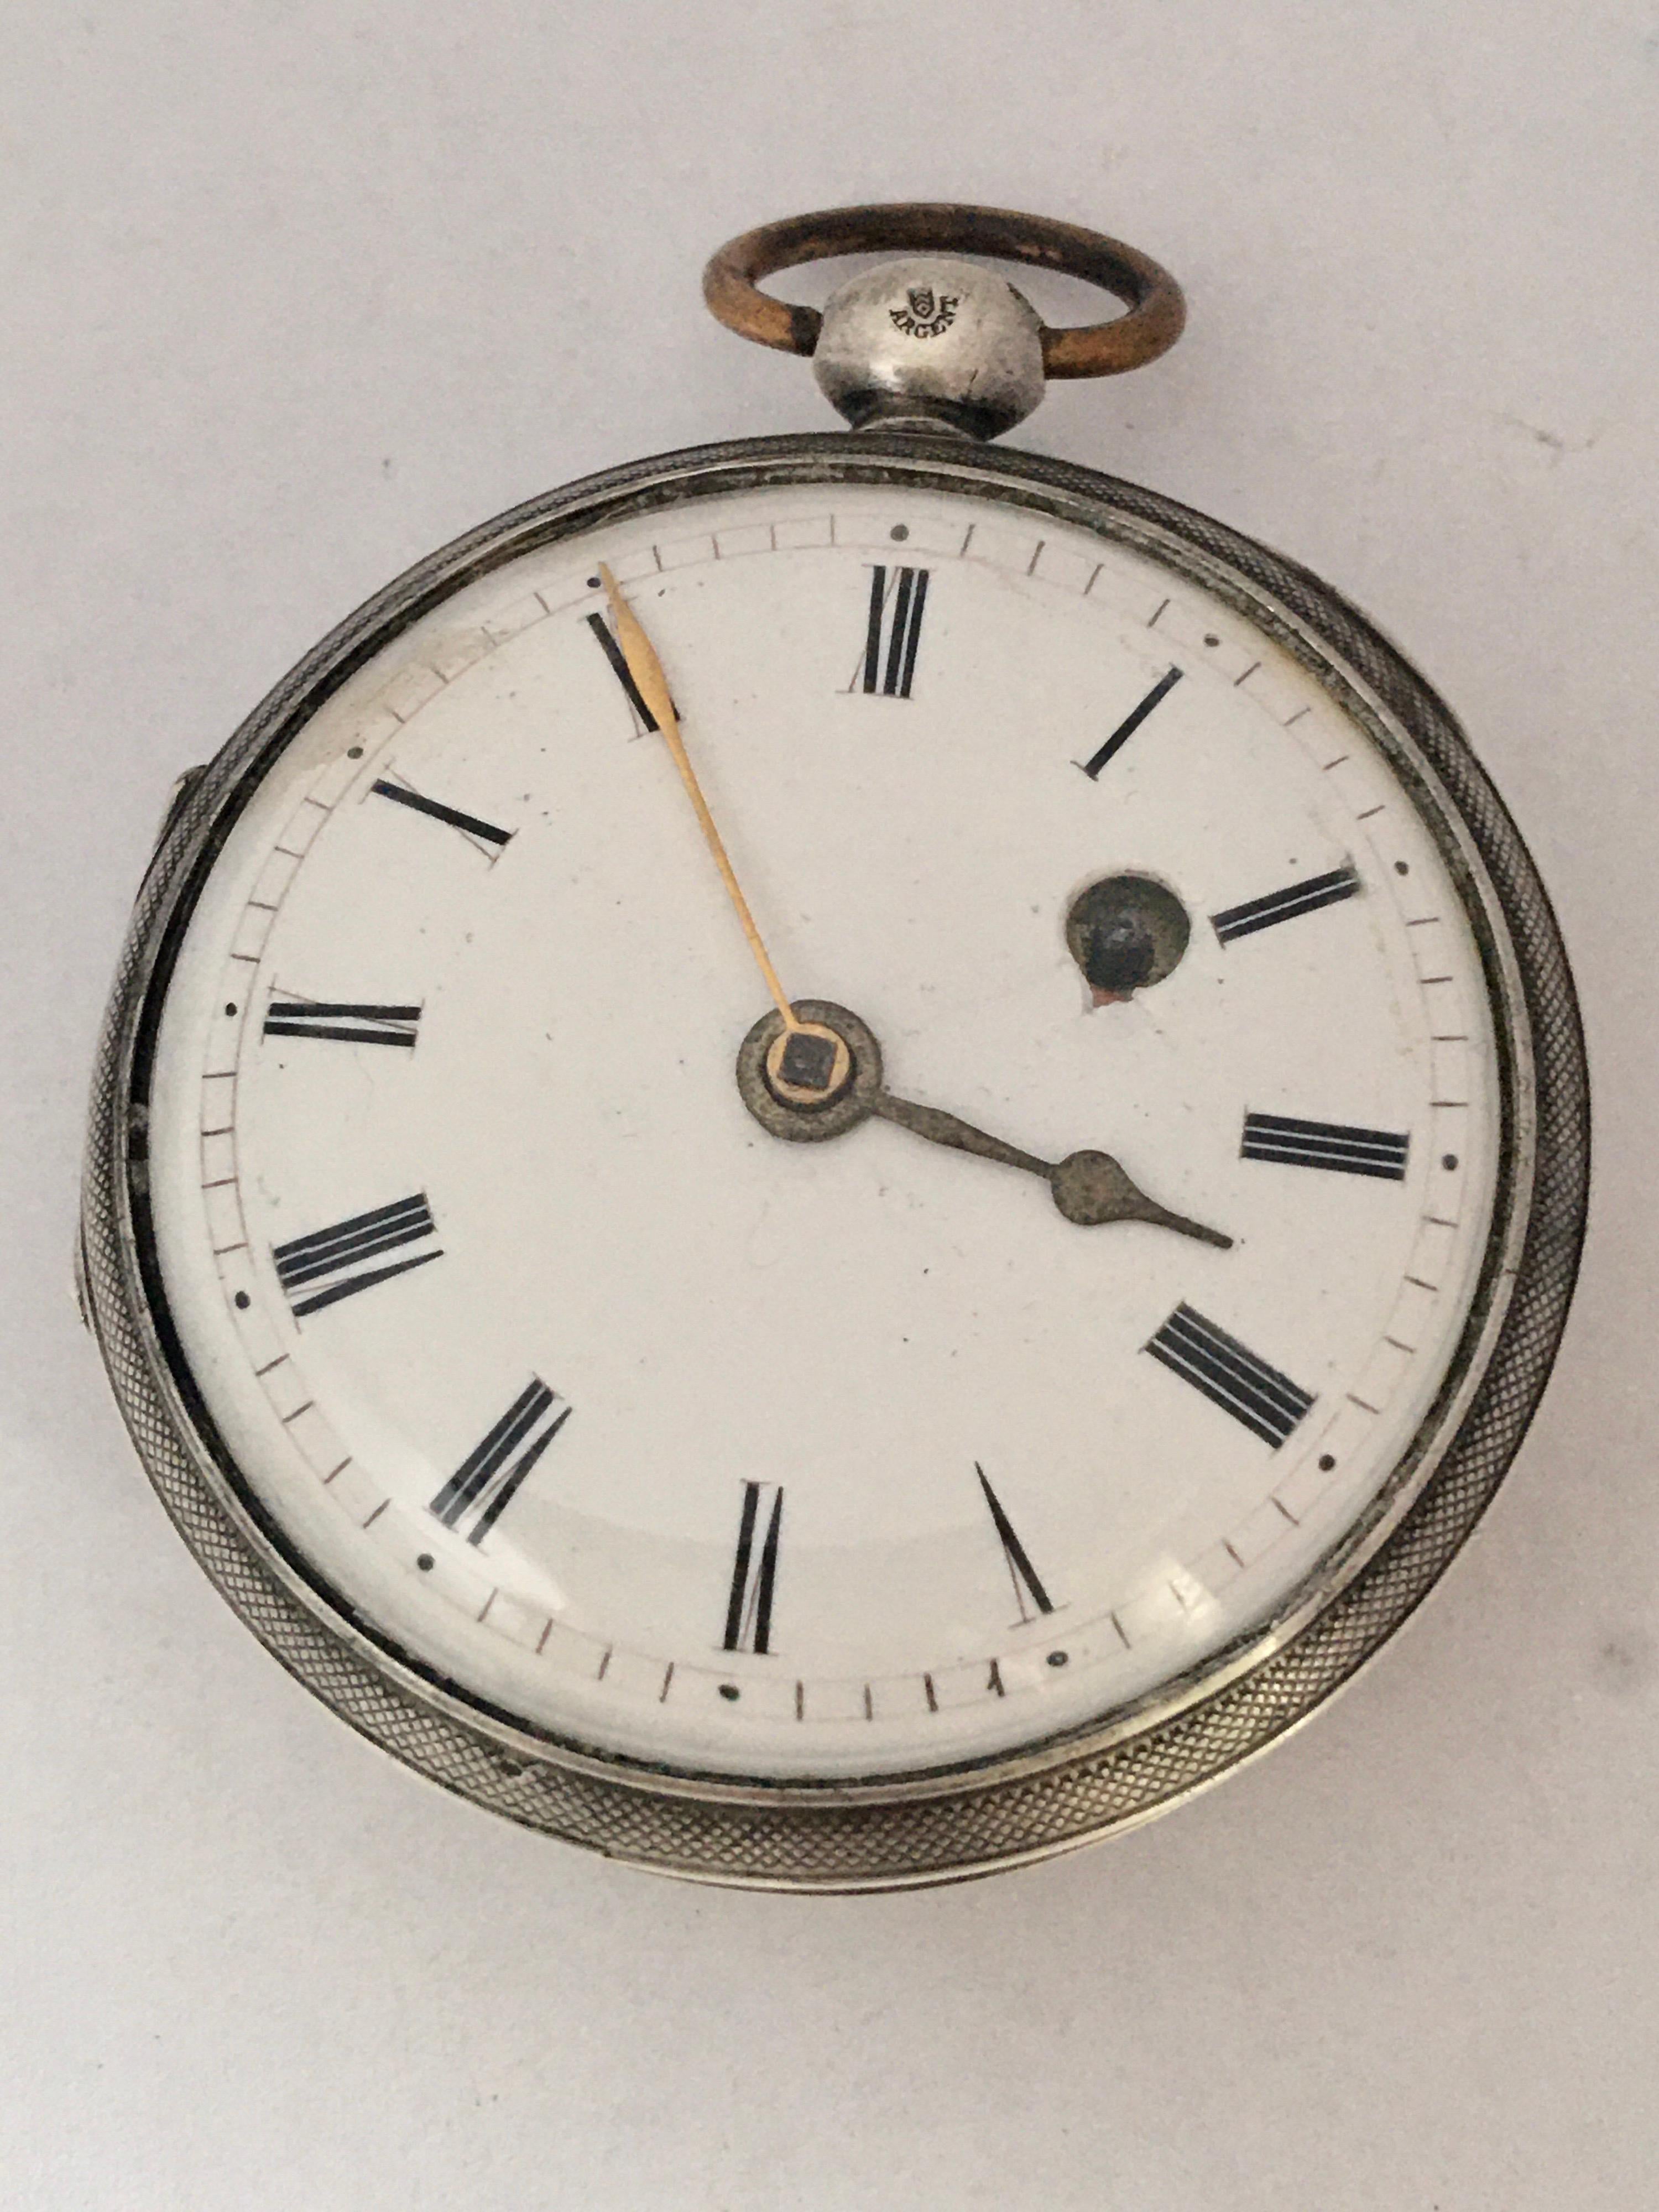 Early Rare Verge Fusee Silver Pocket Early rare Verge Fusee Silver Pocket Watch.

This watch is working and ticking well but I cannot guarantee the time accuracy. It’s a bit fast. Visible signs of ageing and wear with scratches and blemishes on the